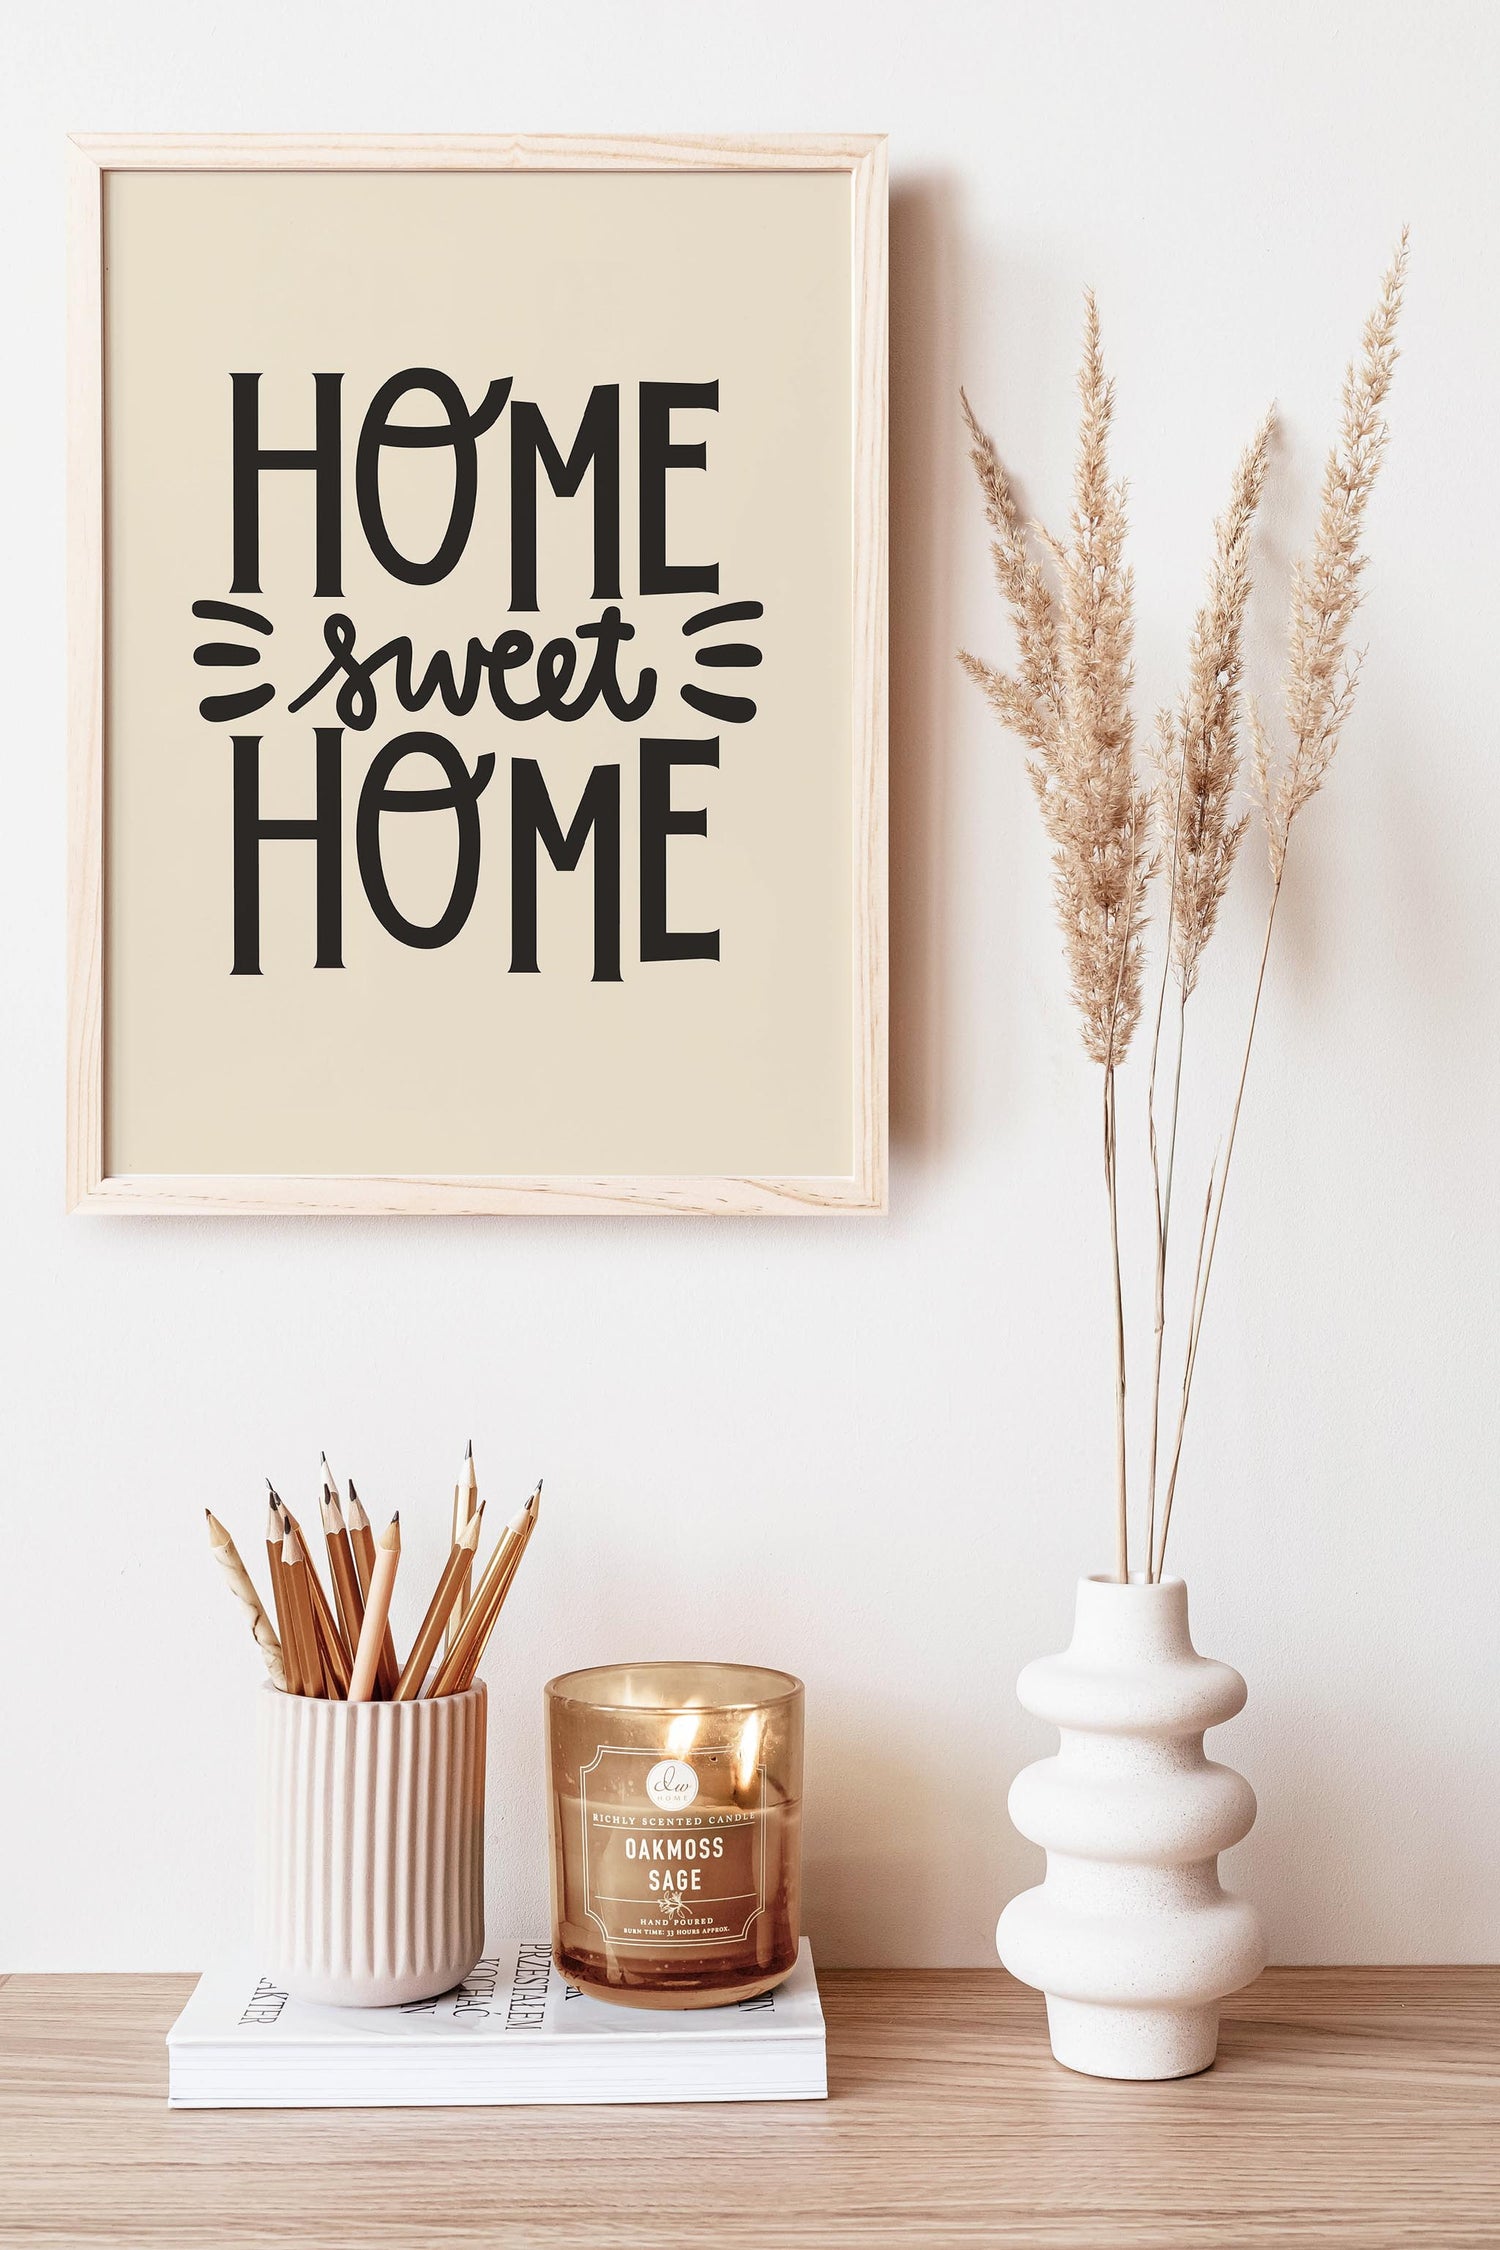 Home Sweet Home art print in Black by artist Brenda Bird pictured in an office